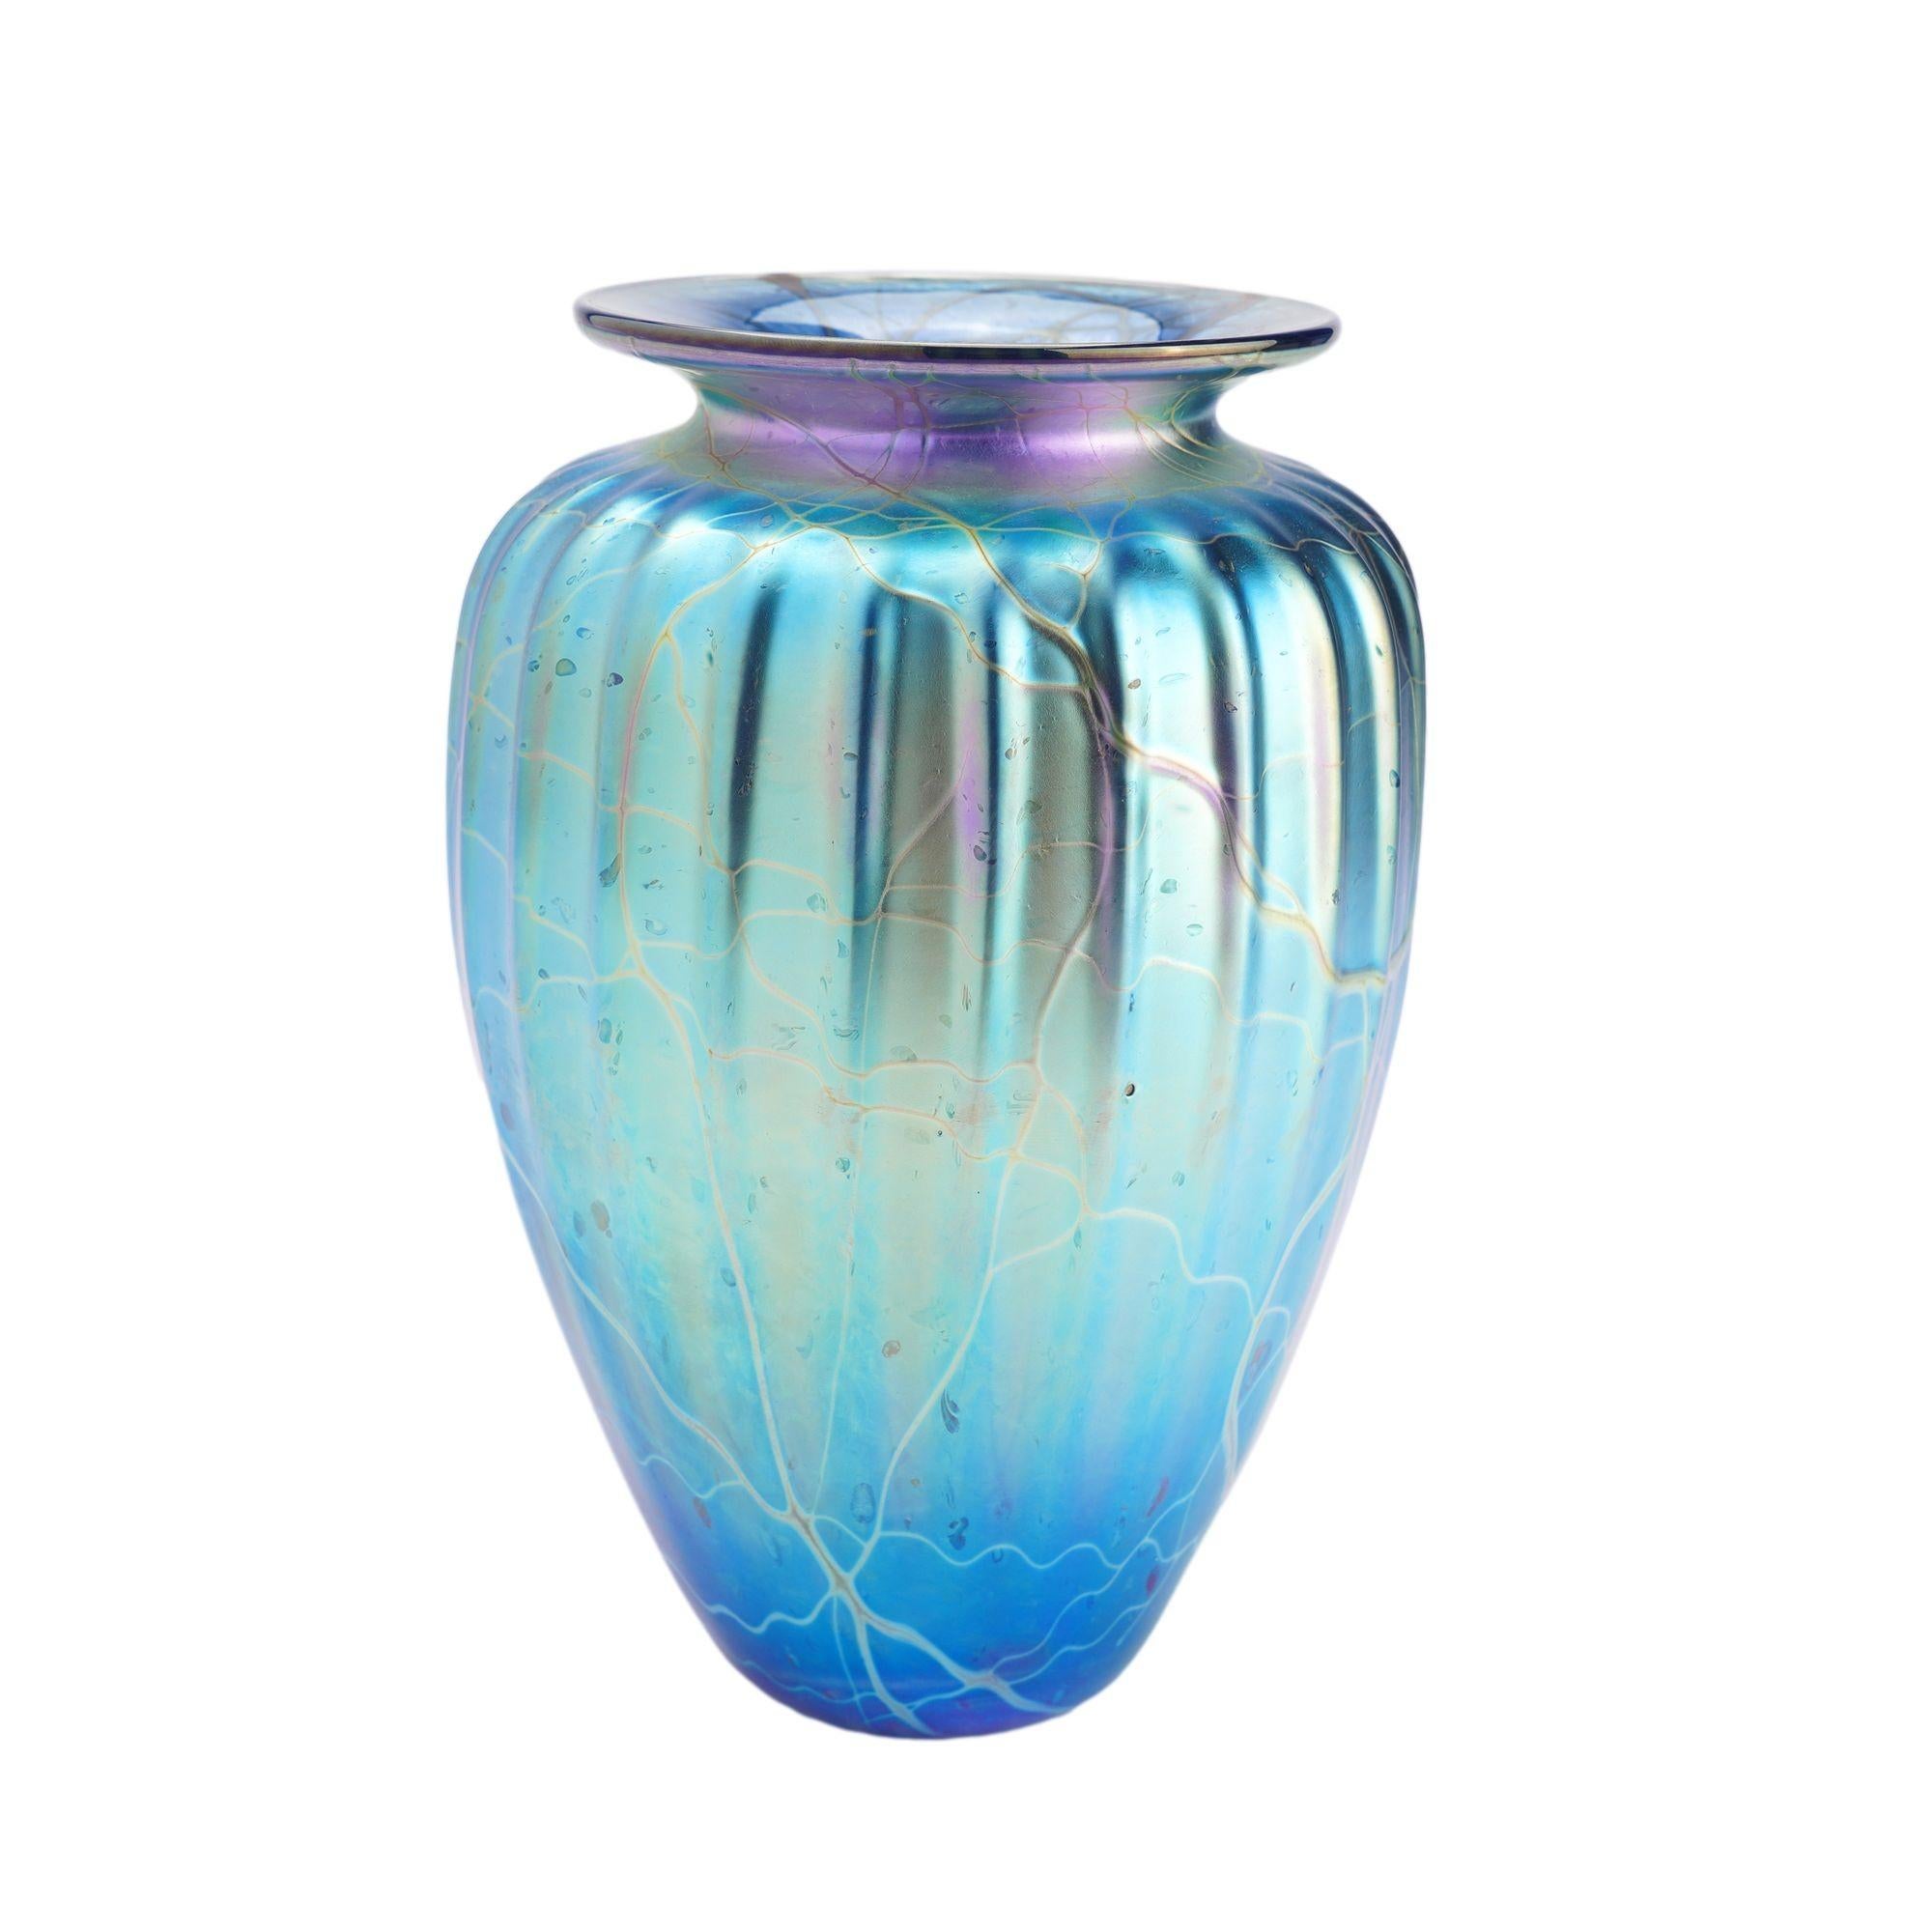 Iridescent blue blown glass vase by Mayauel Ward, 2015 For Sale